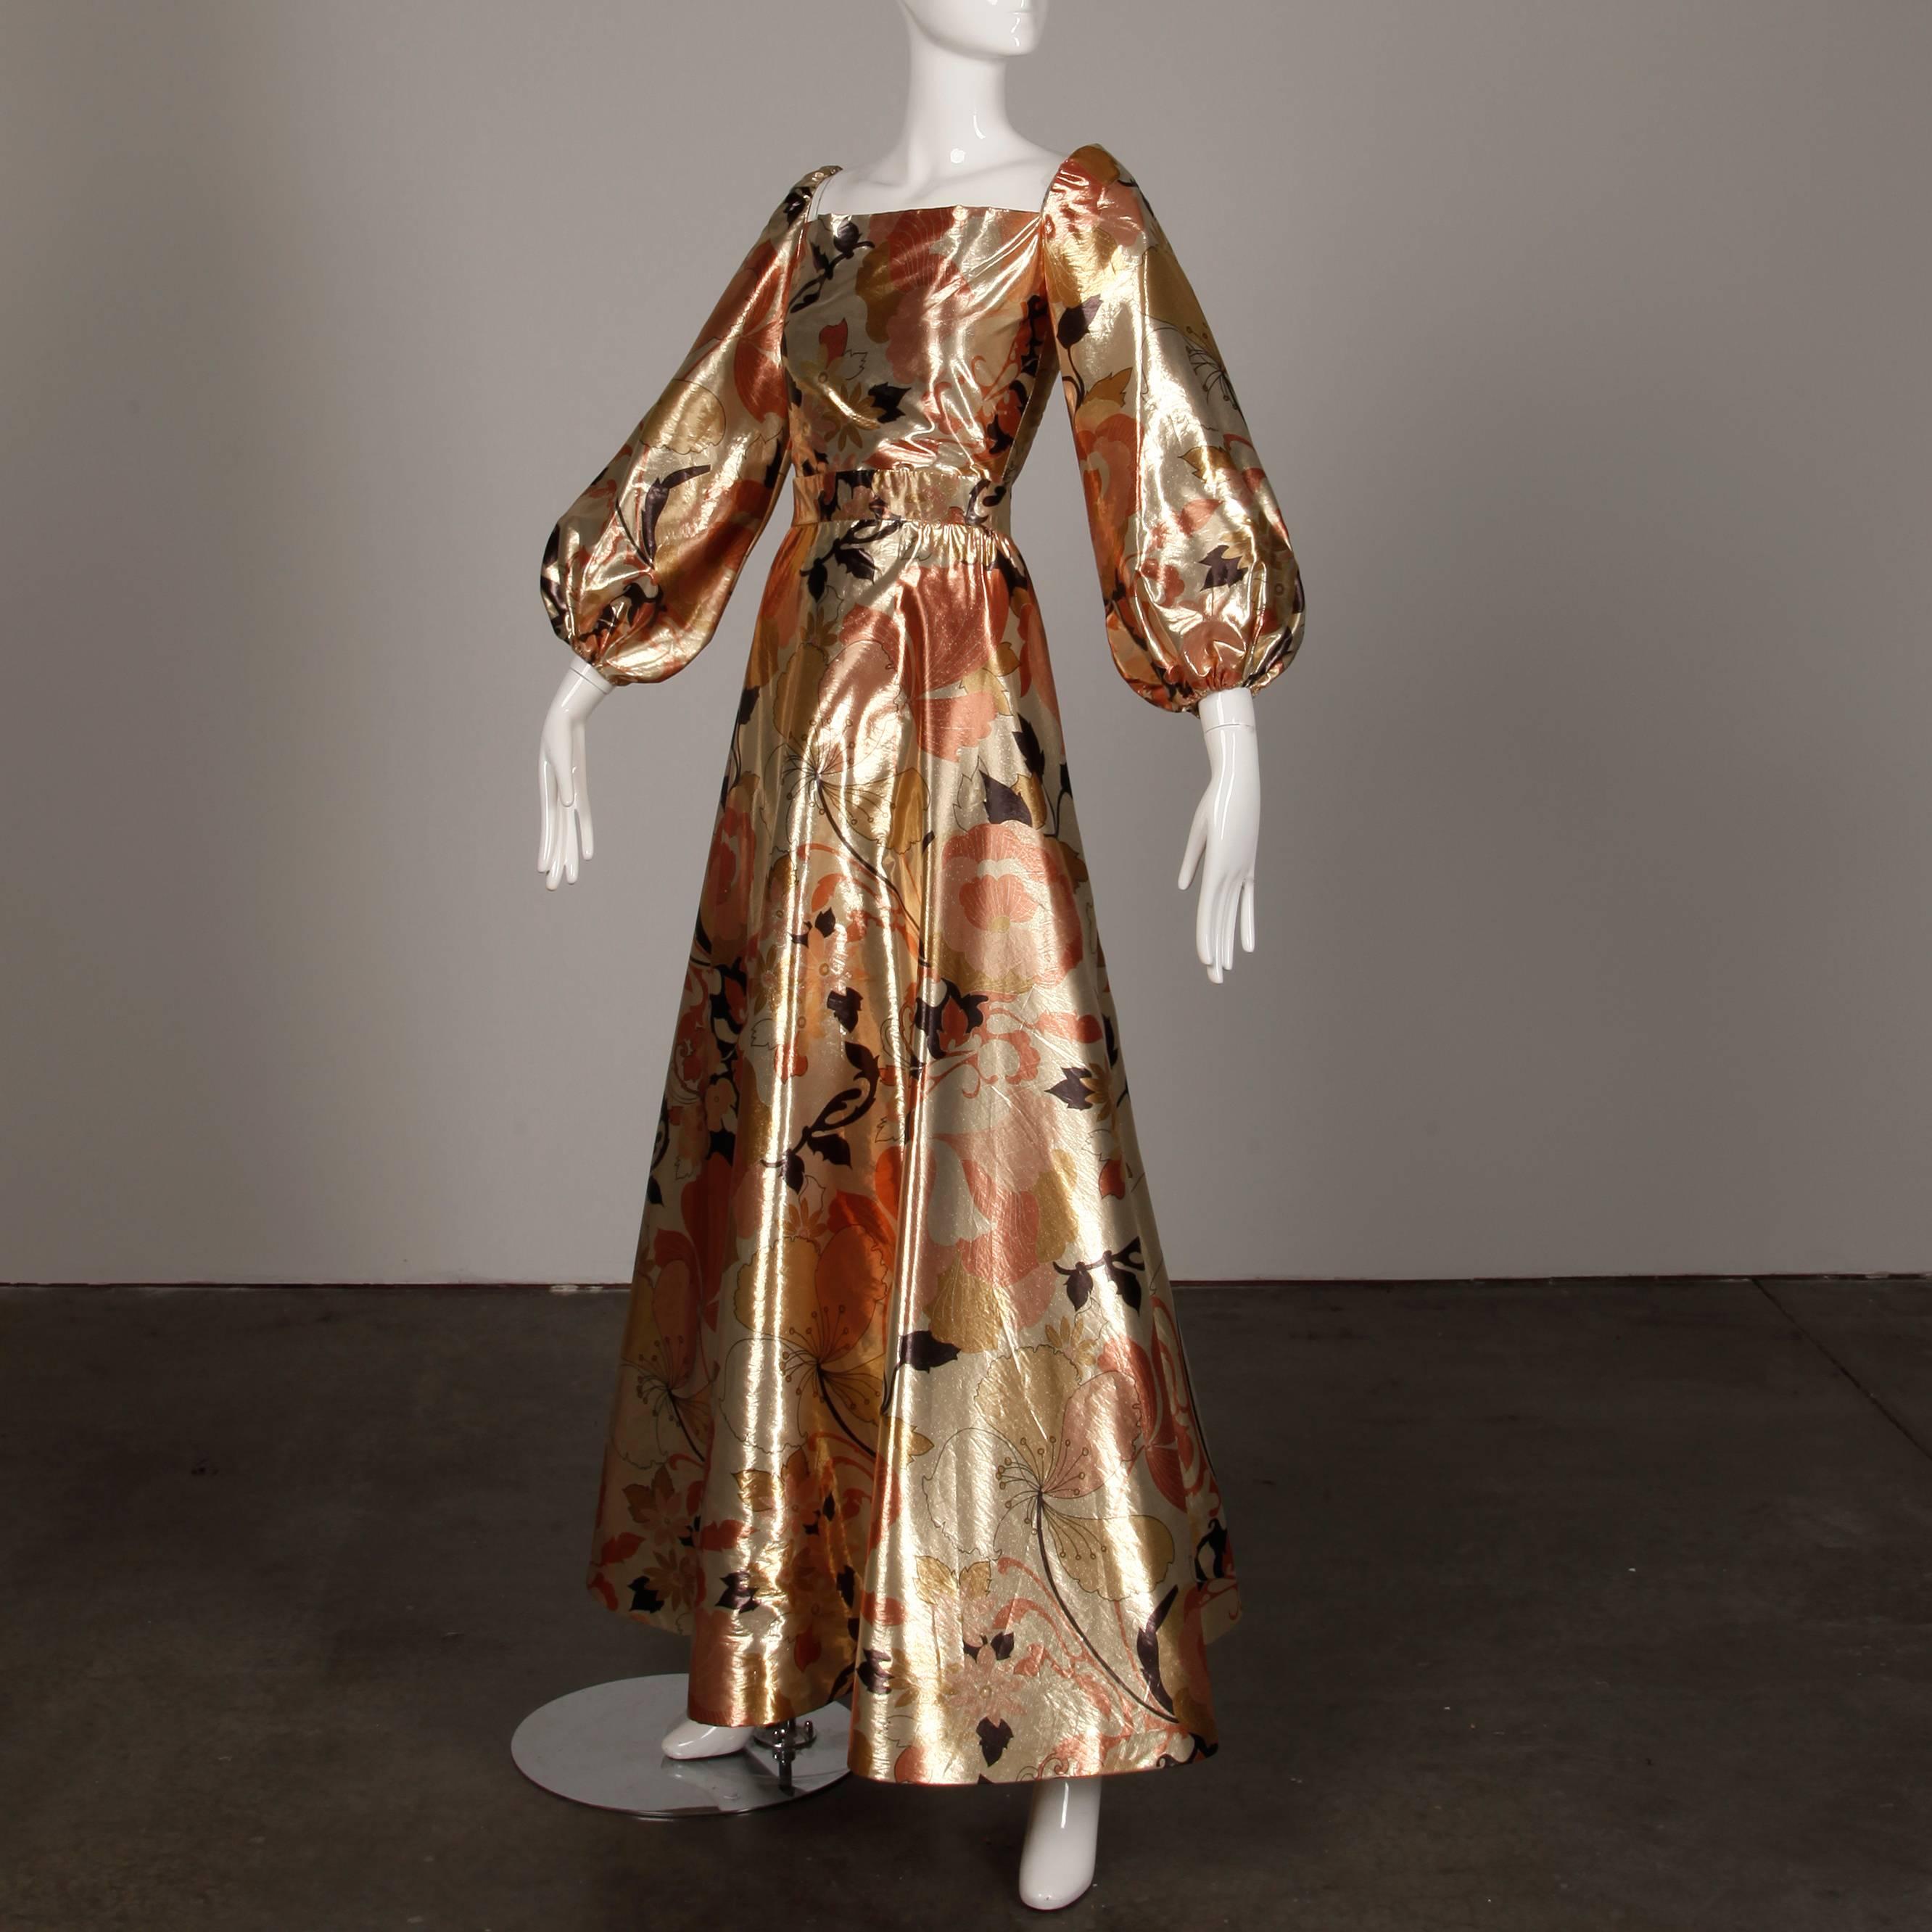 Brown 1970s Arnold Scaasi Vintage Metallic Gold Lamé Silk Dress/ Gown (Skirt + Top) For Sale